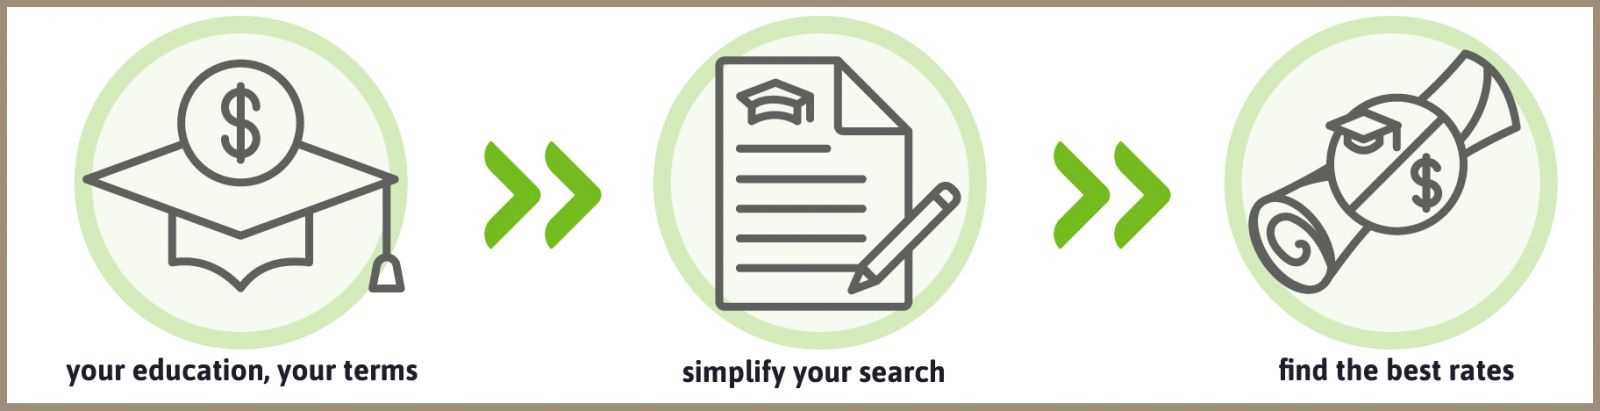 your education, your terms | simplify your search | find the best rates